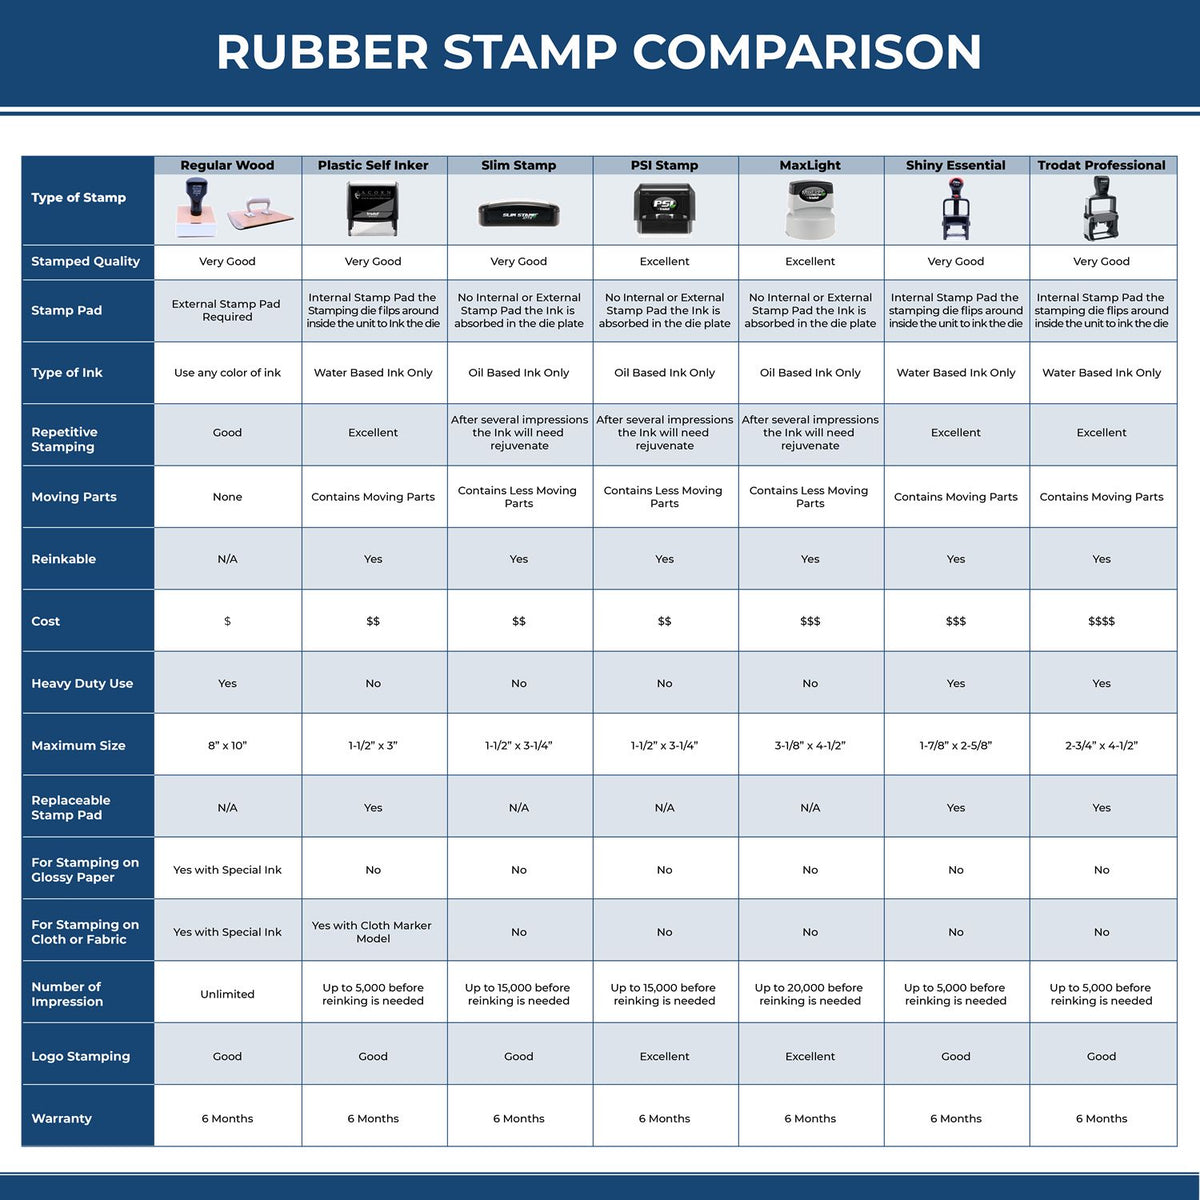 A comparison chart for the different types of mount models available for the West Virginia Professional Engineer Seal Stamp.